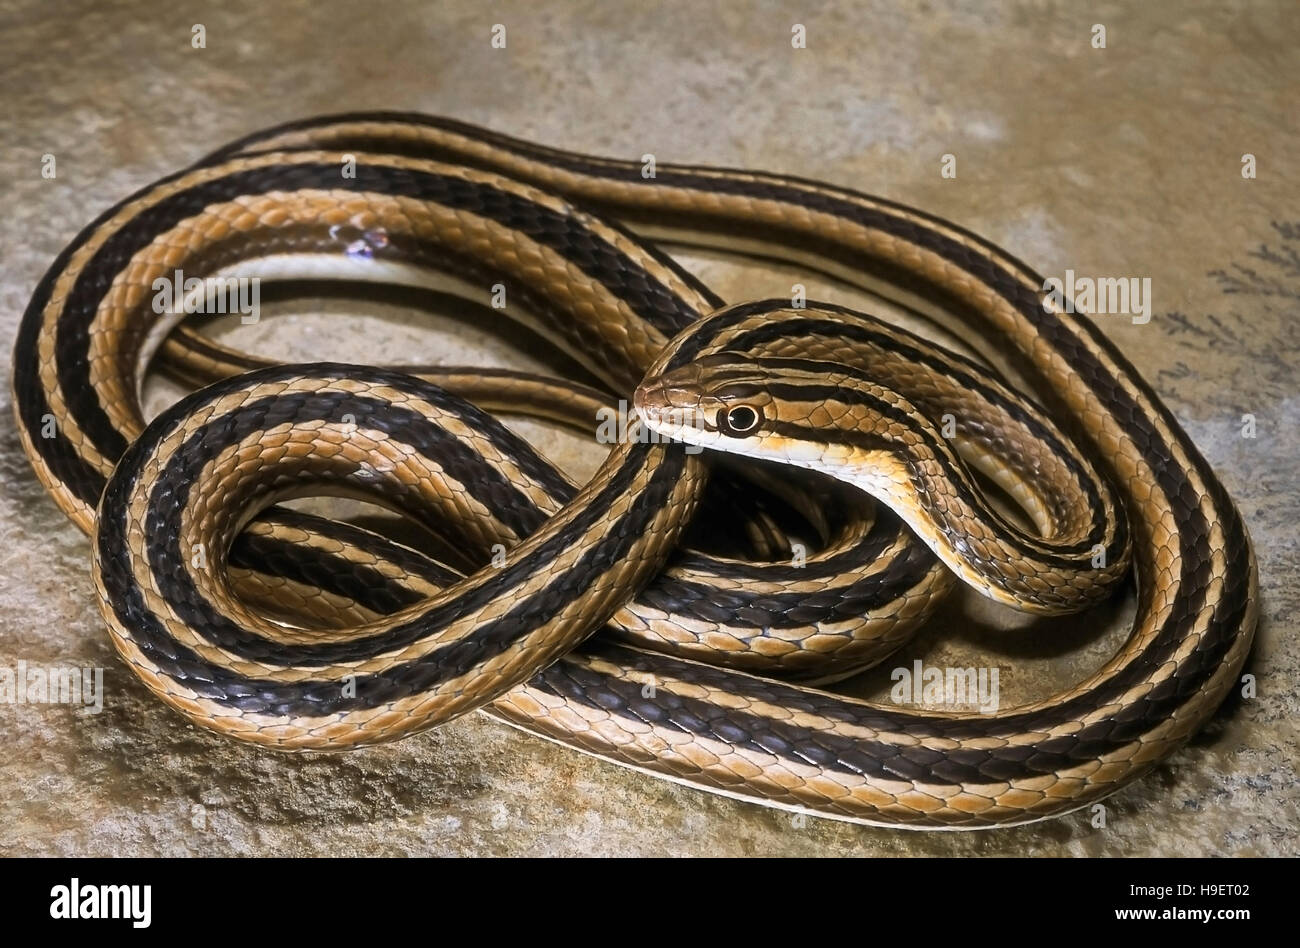 LEITH'S SAND SNAKE Psammophis leithii from Ahmedabad, Gujarat, India. Entire body - compact coils. Stock Photo